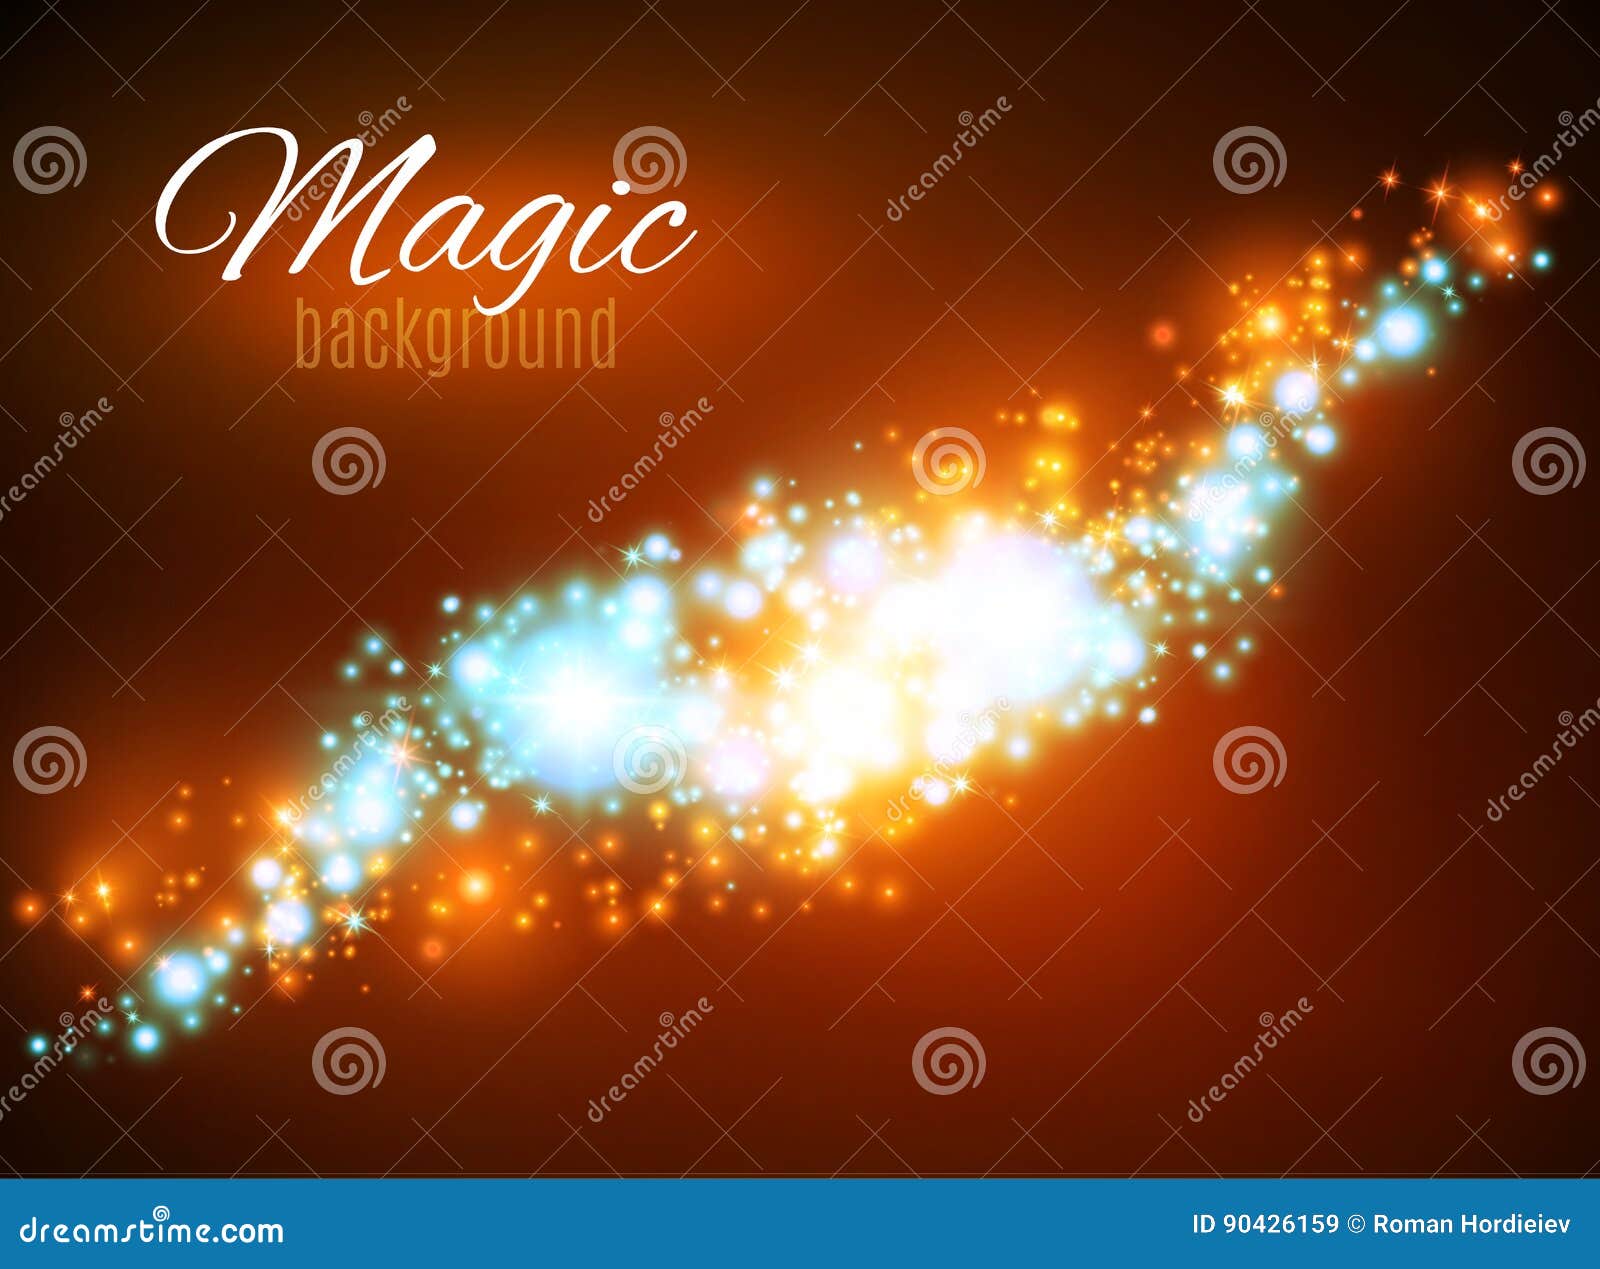 Magic space fairy dust infinity abstract Vector Image